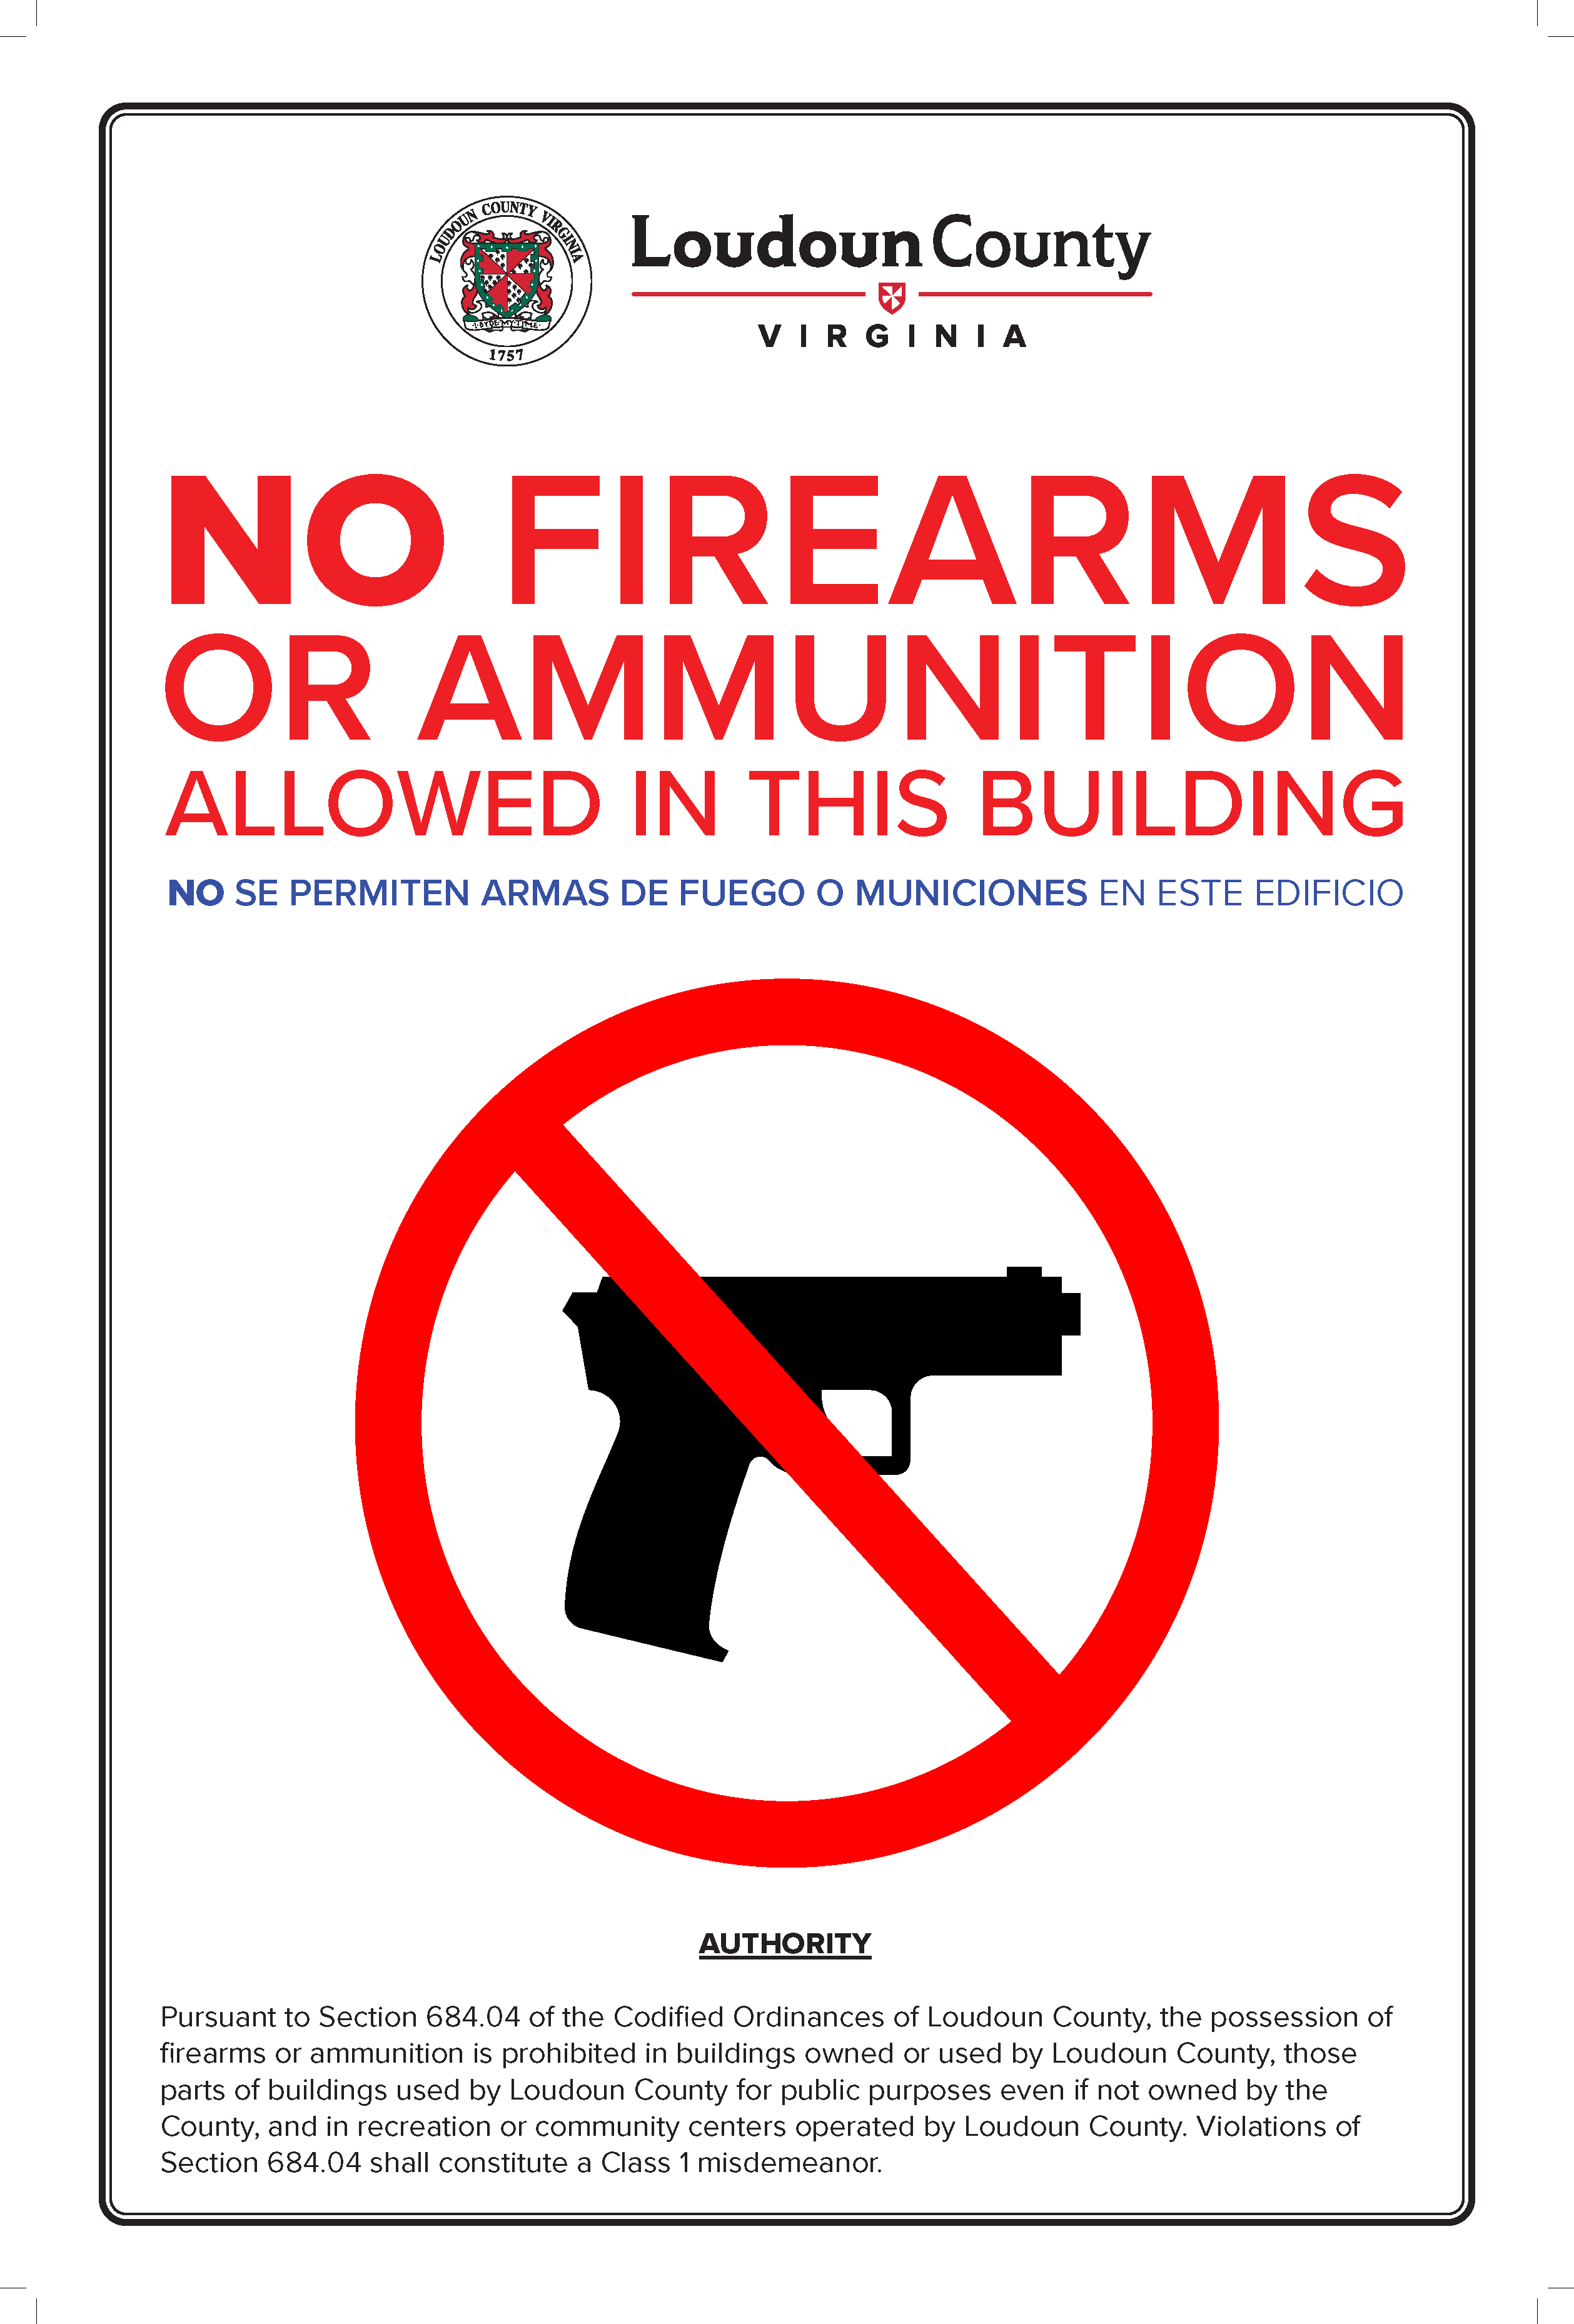 Image of Firearms Ordinance Sign